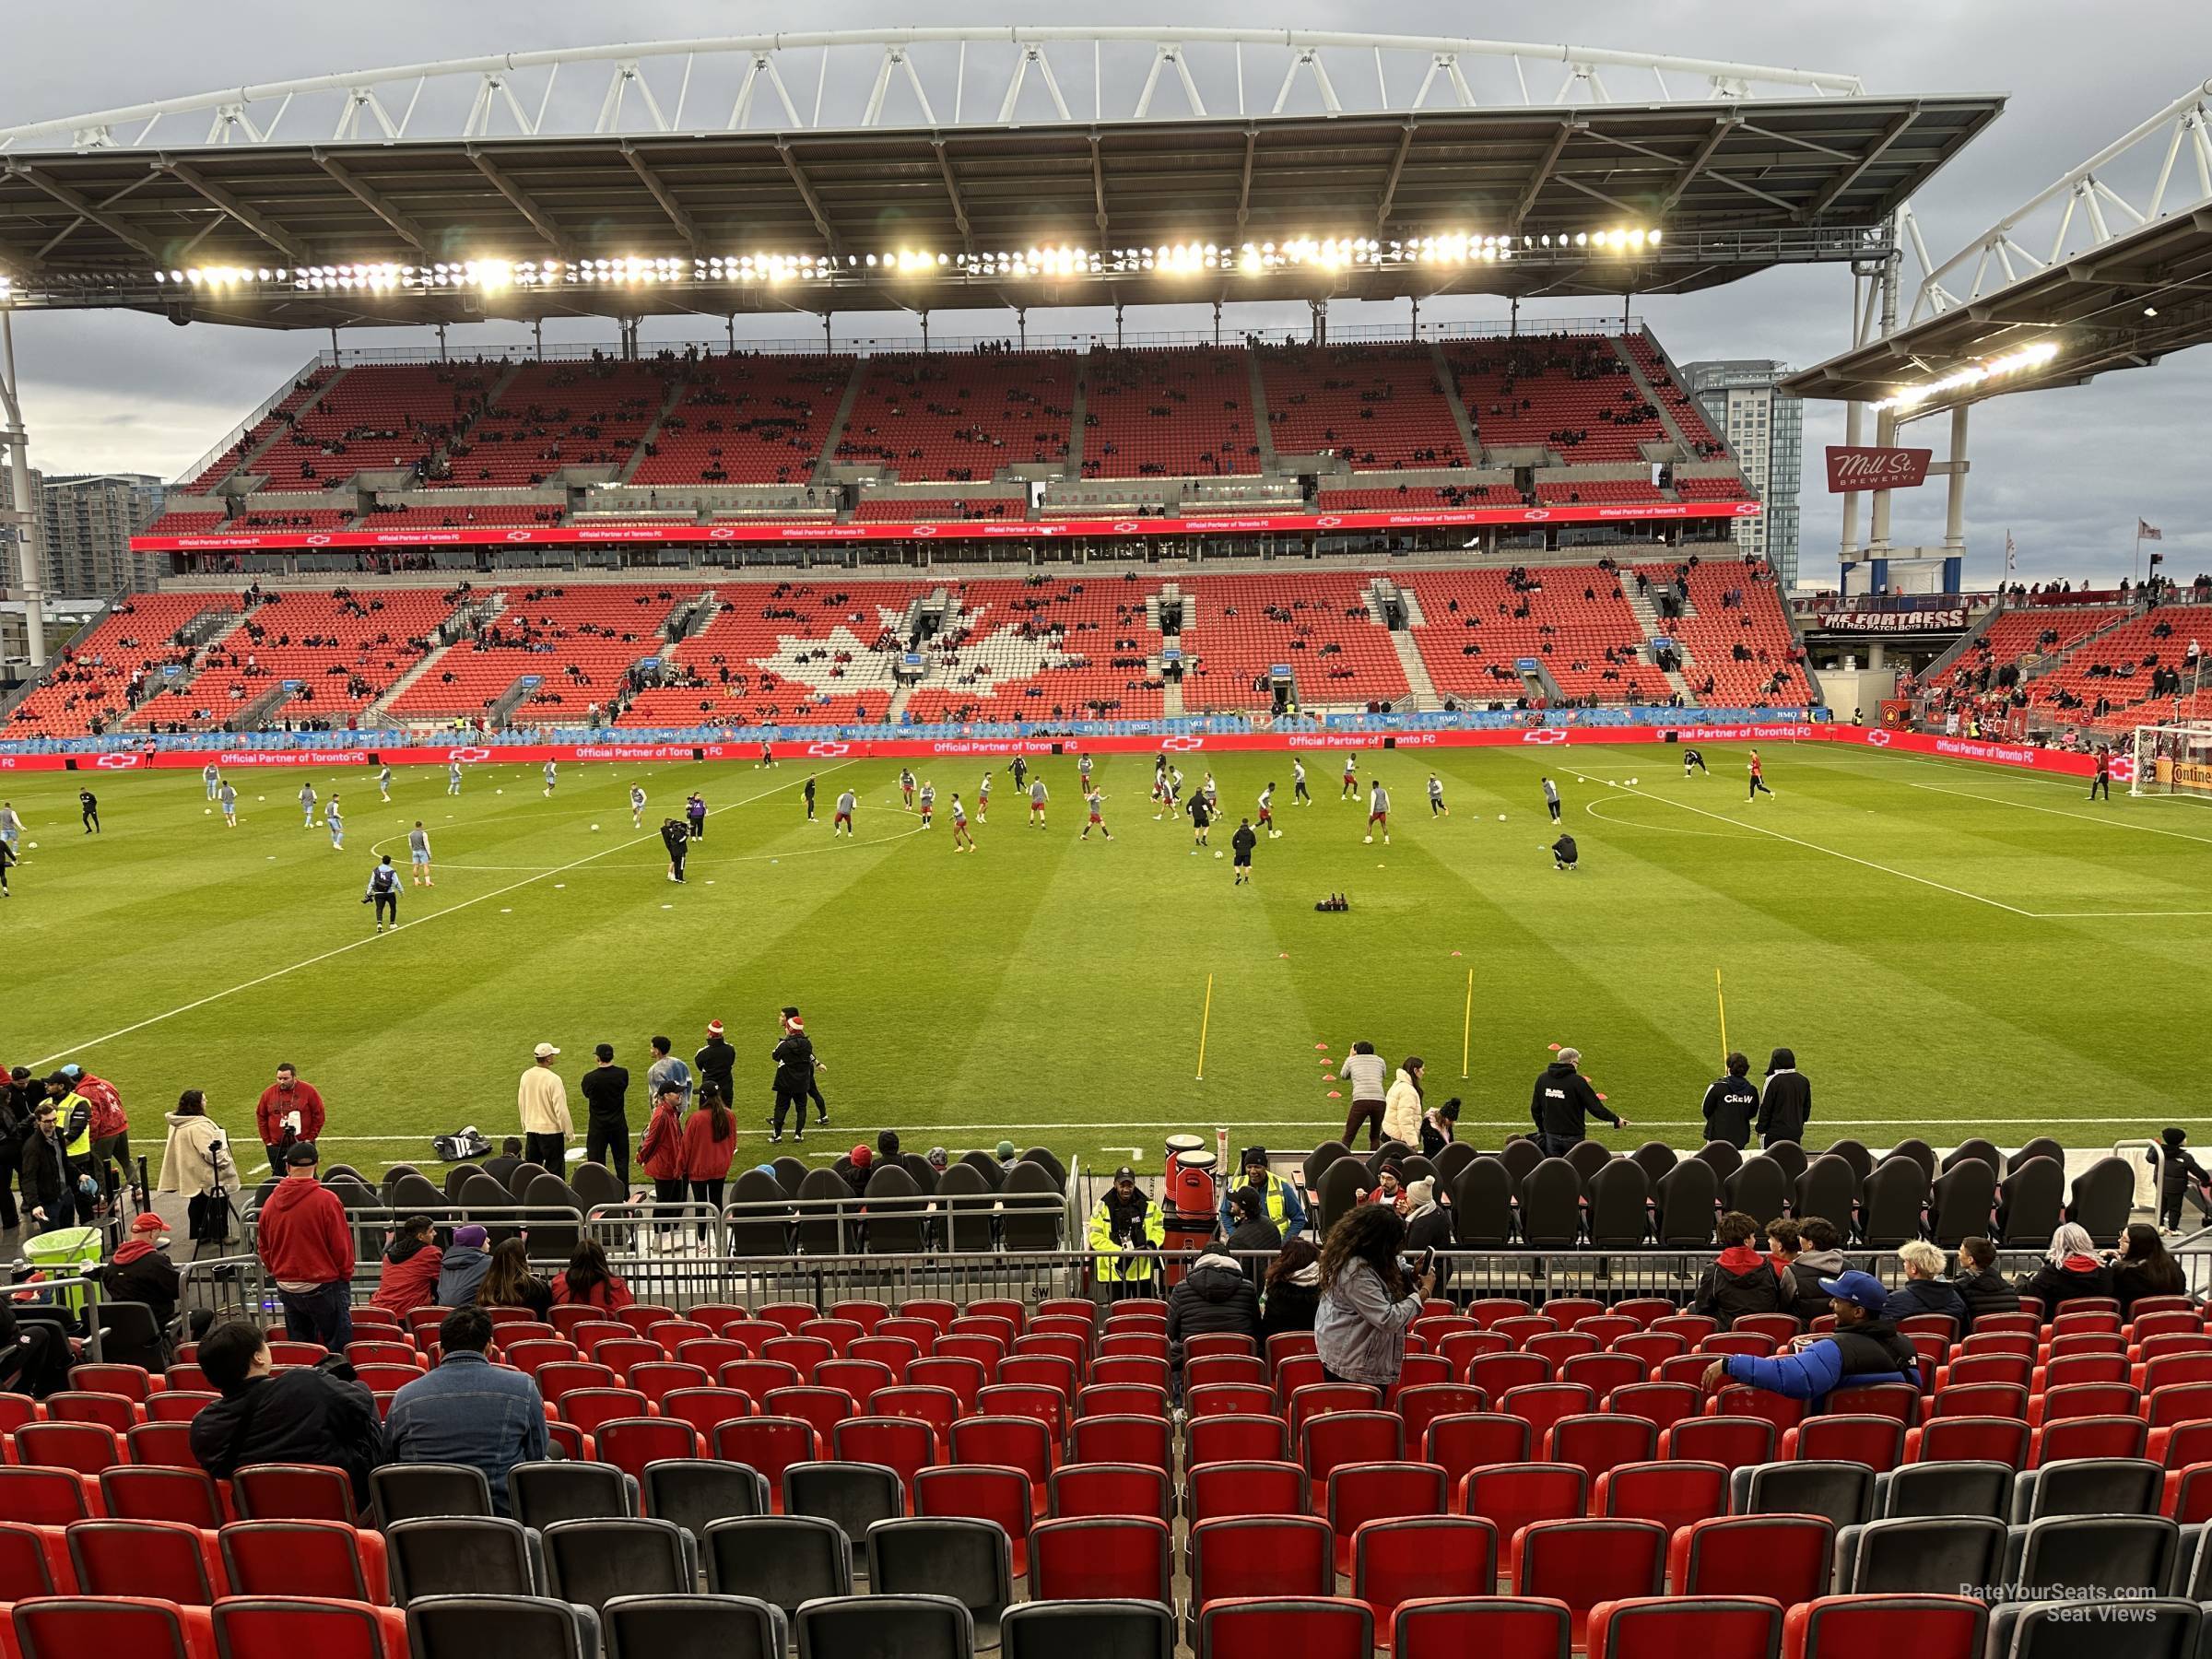 section 122, row 15 seat view  - bmo field